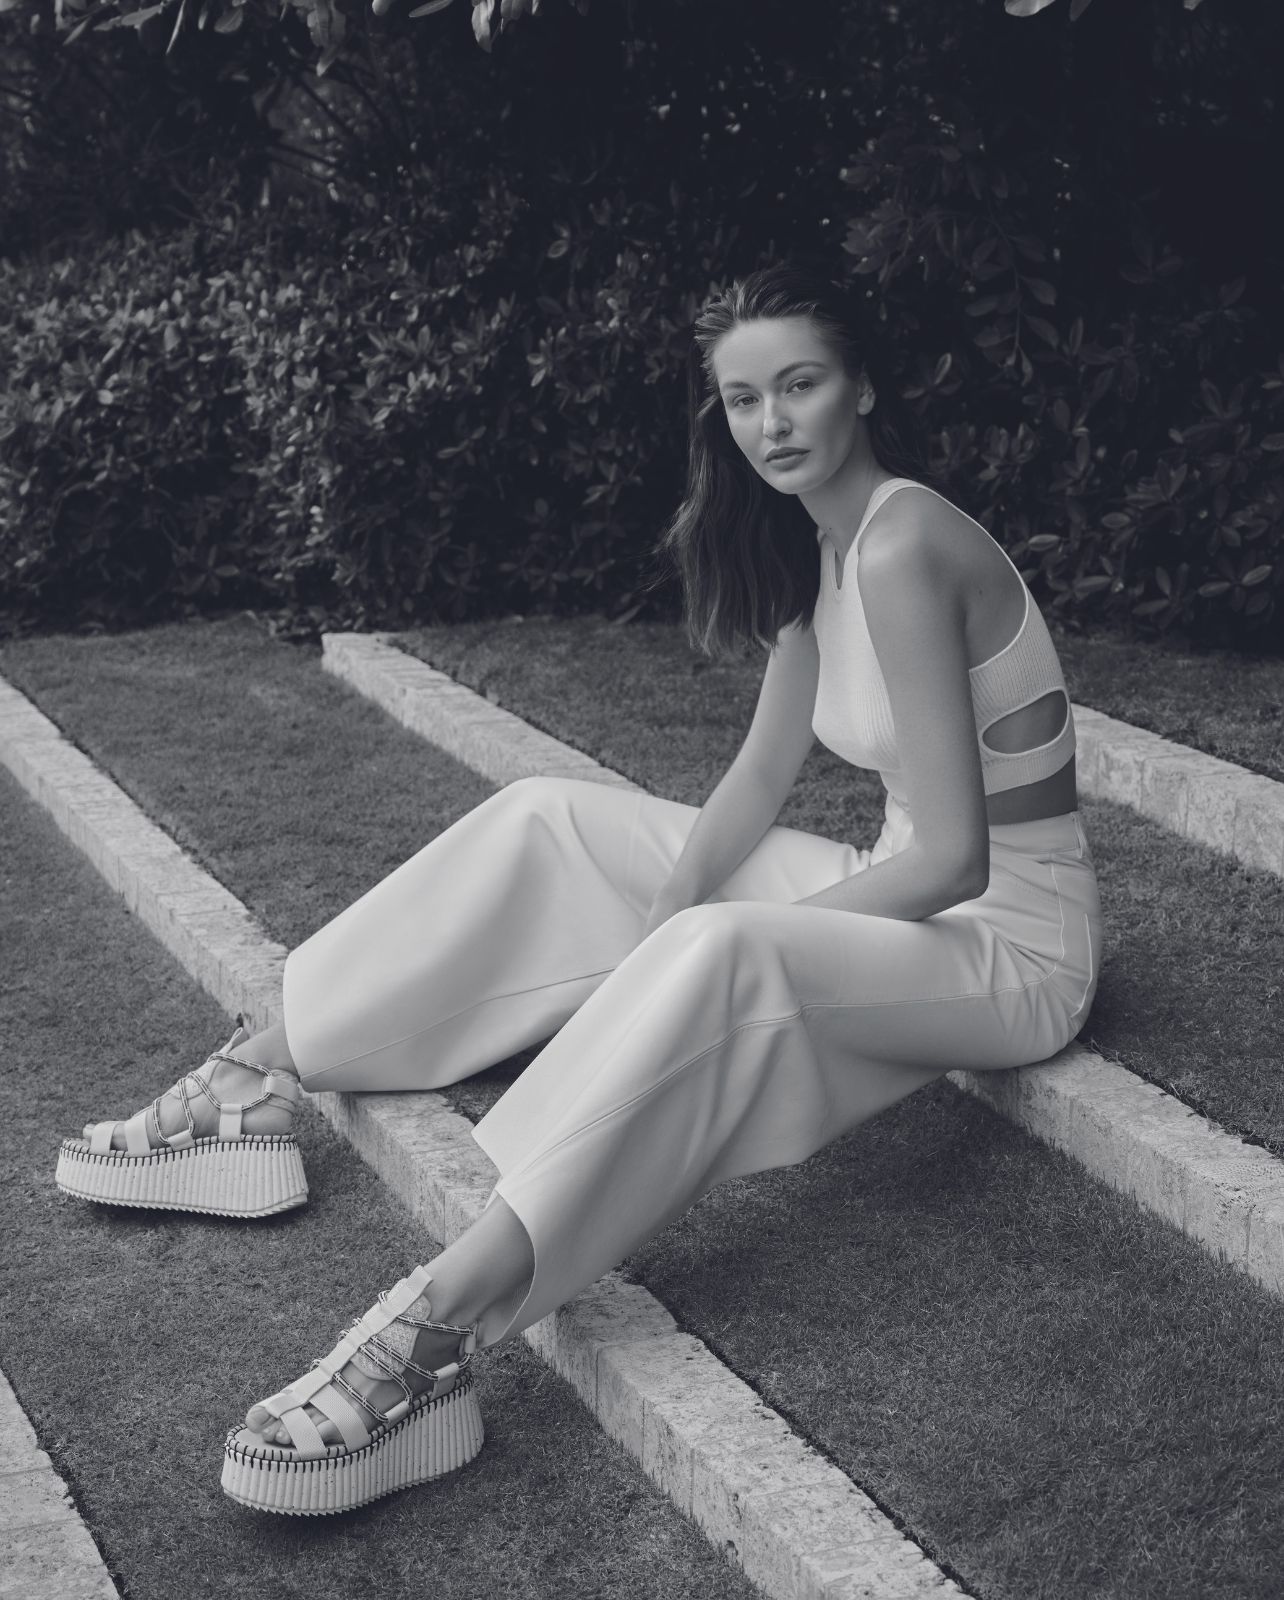 Model poses in grass wearing white Chloe pants, top, and platform sandals